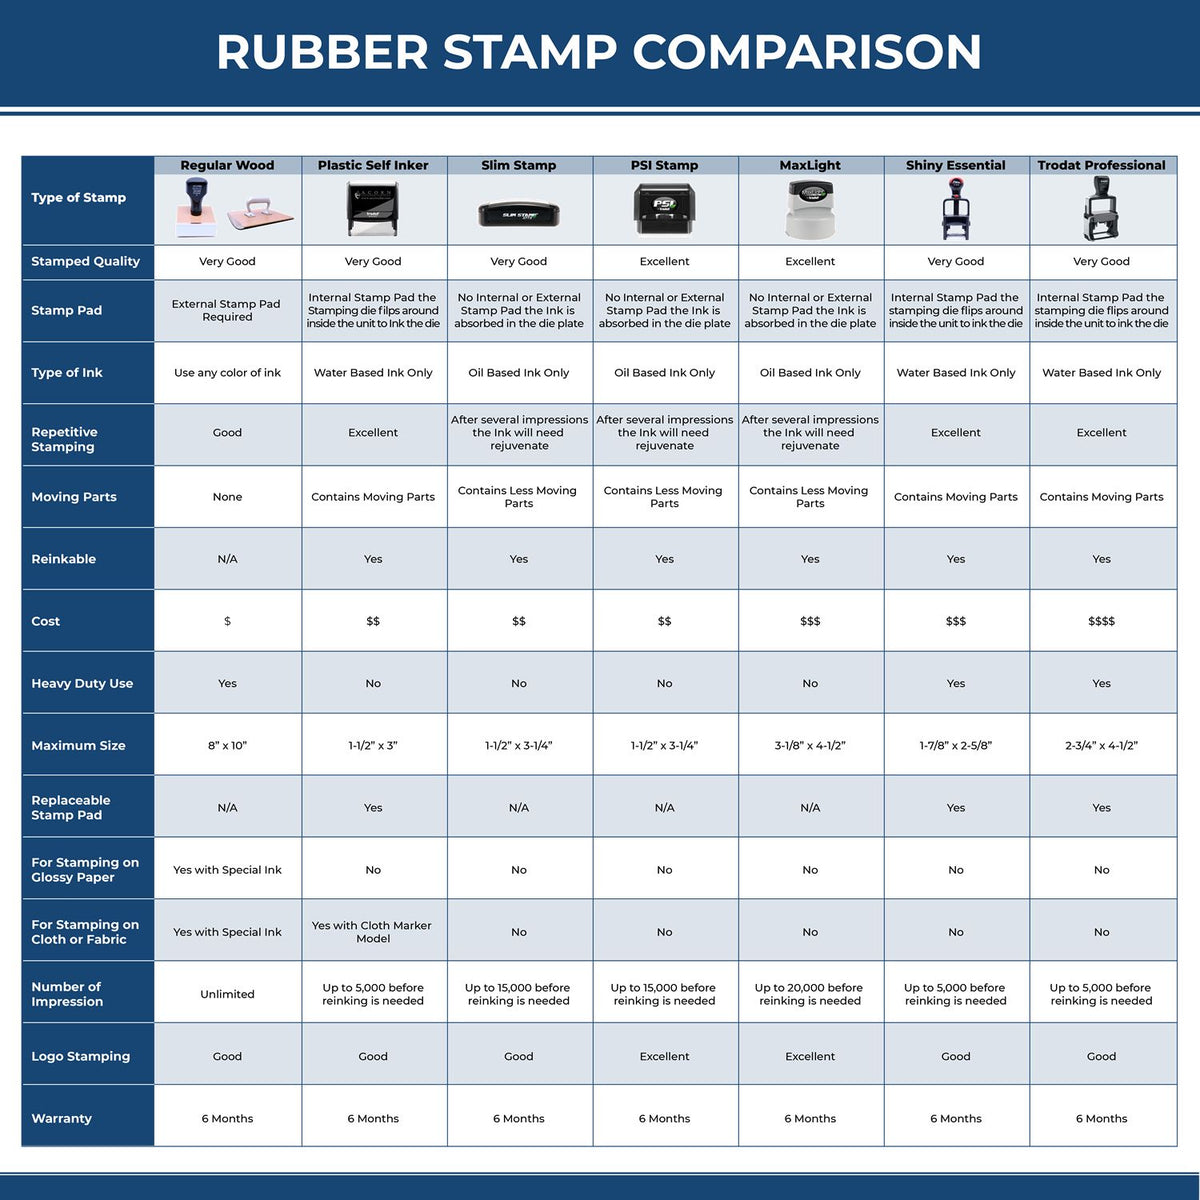 A comparison chart for the different types of mount models available for the Premium MaxLight Pre-Inked Kentucky Landscape Architectural Stamp.